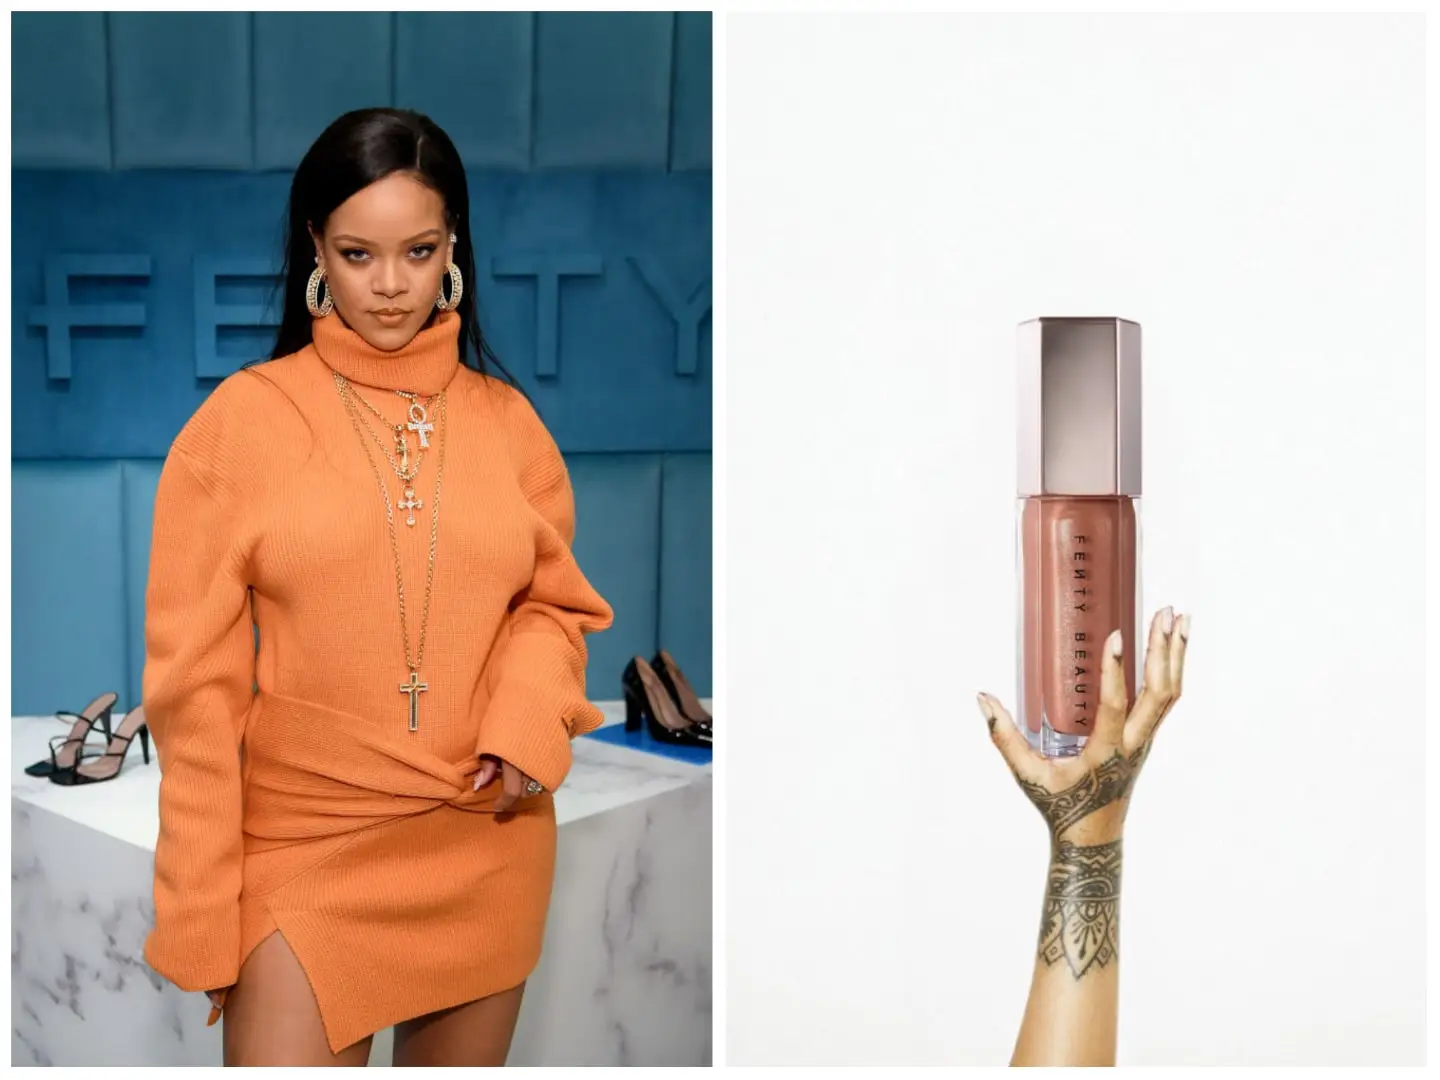 Fenty Beauty gets noticed by Chinese fans during Super Bowl